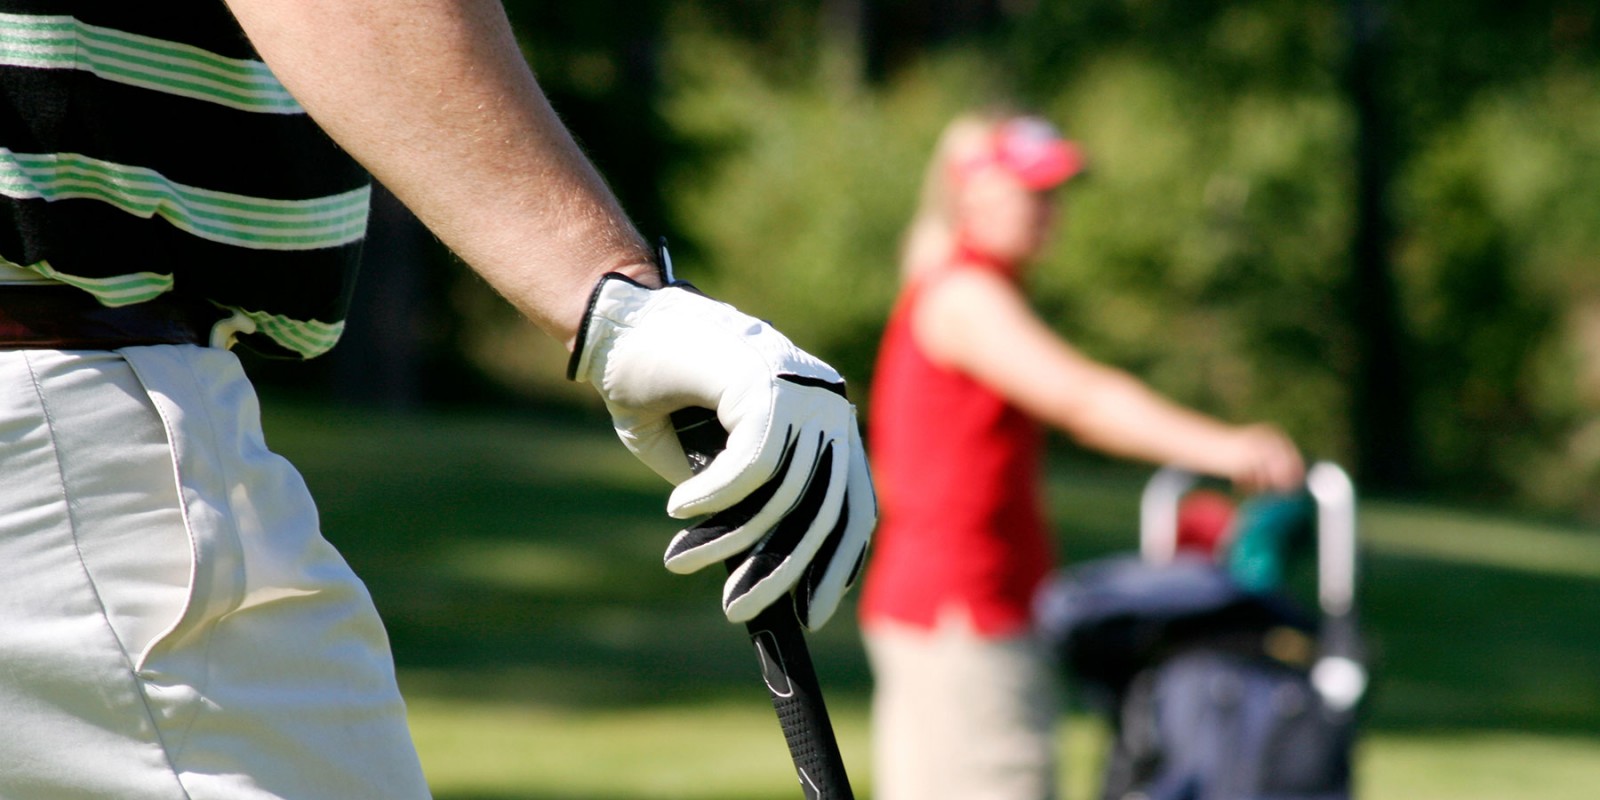 Injuries in golf